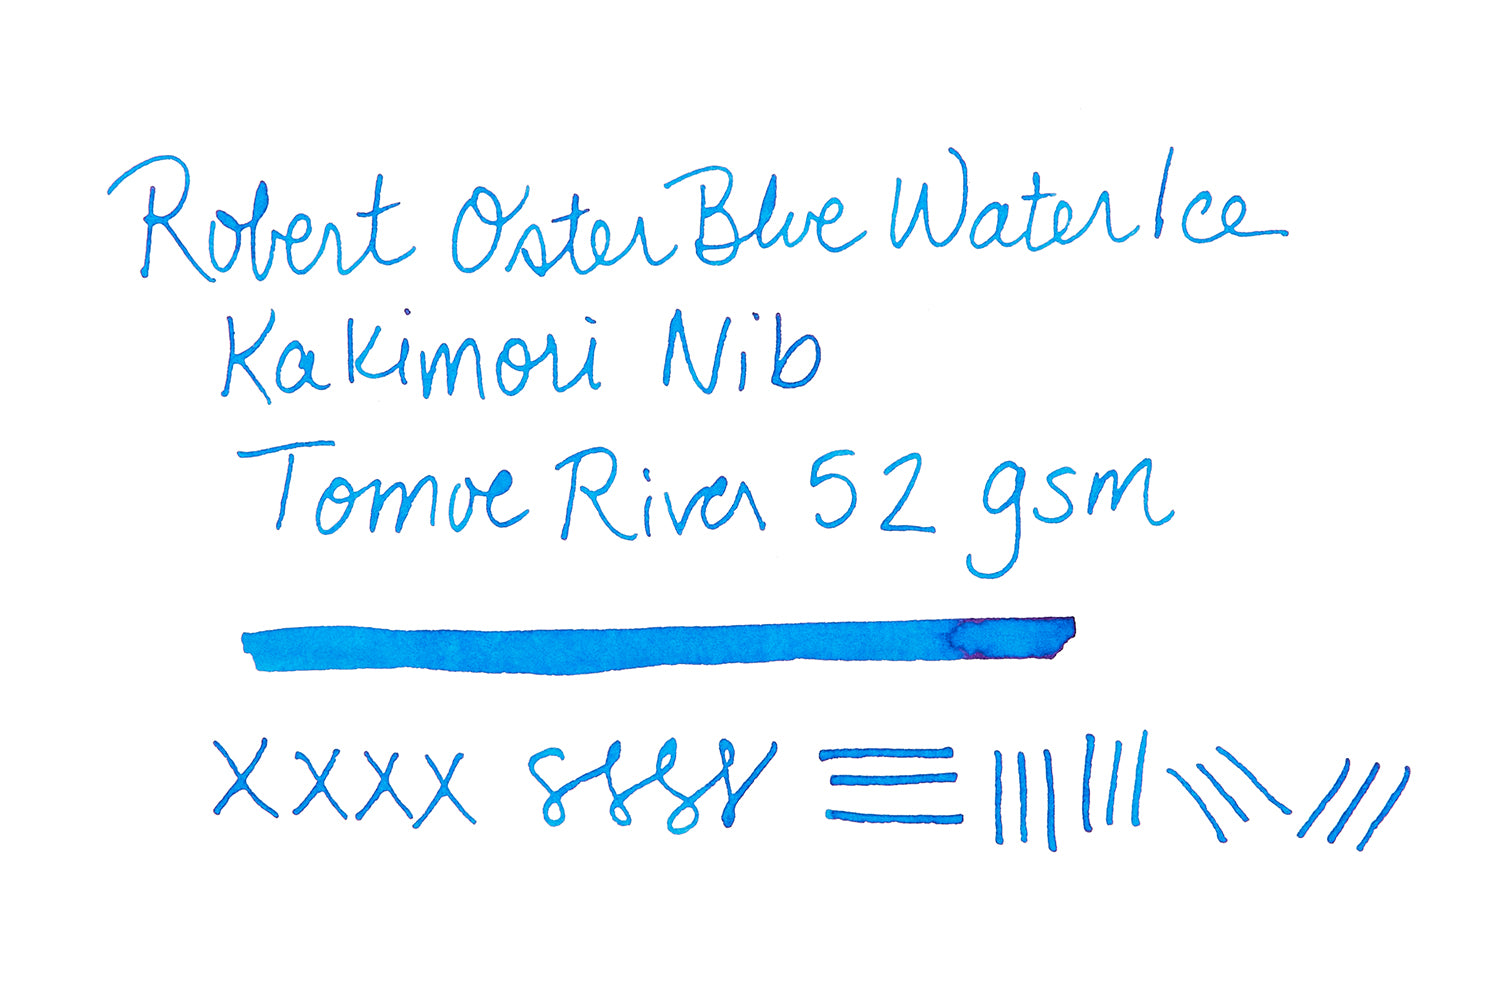 Robert Oster Blue Water Ice Fountain Pen Ink writing sample .wbon white blank paper